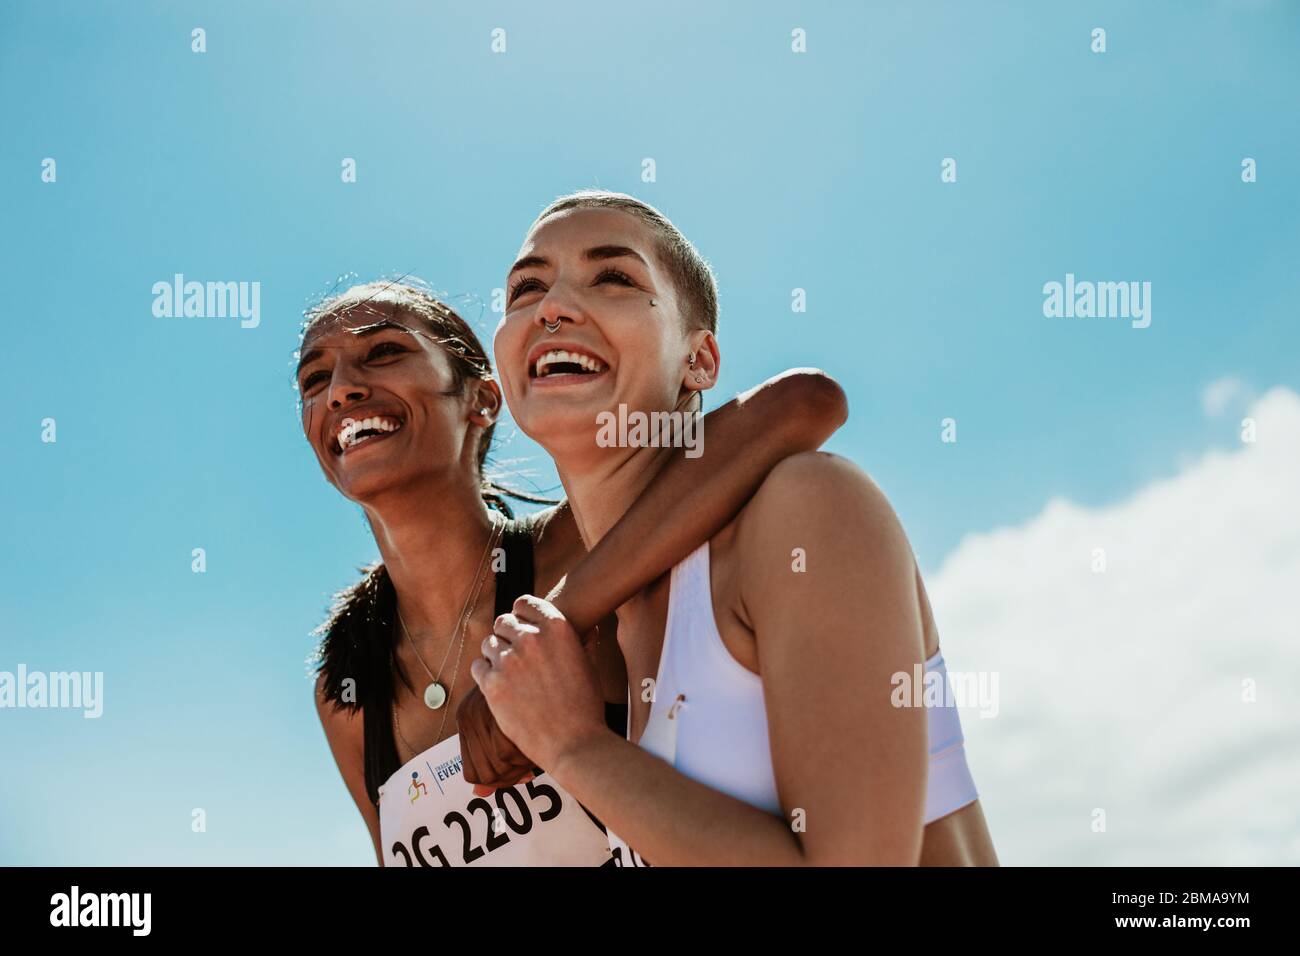 Two young woman athletes smiling outdoors. Female runners looking happy after winning the competition. Stock Photo